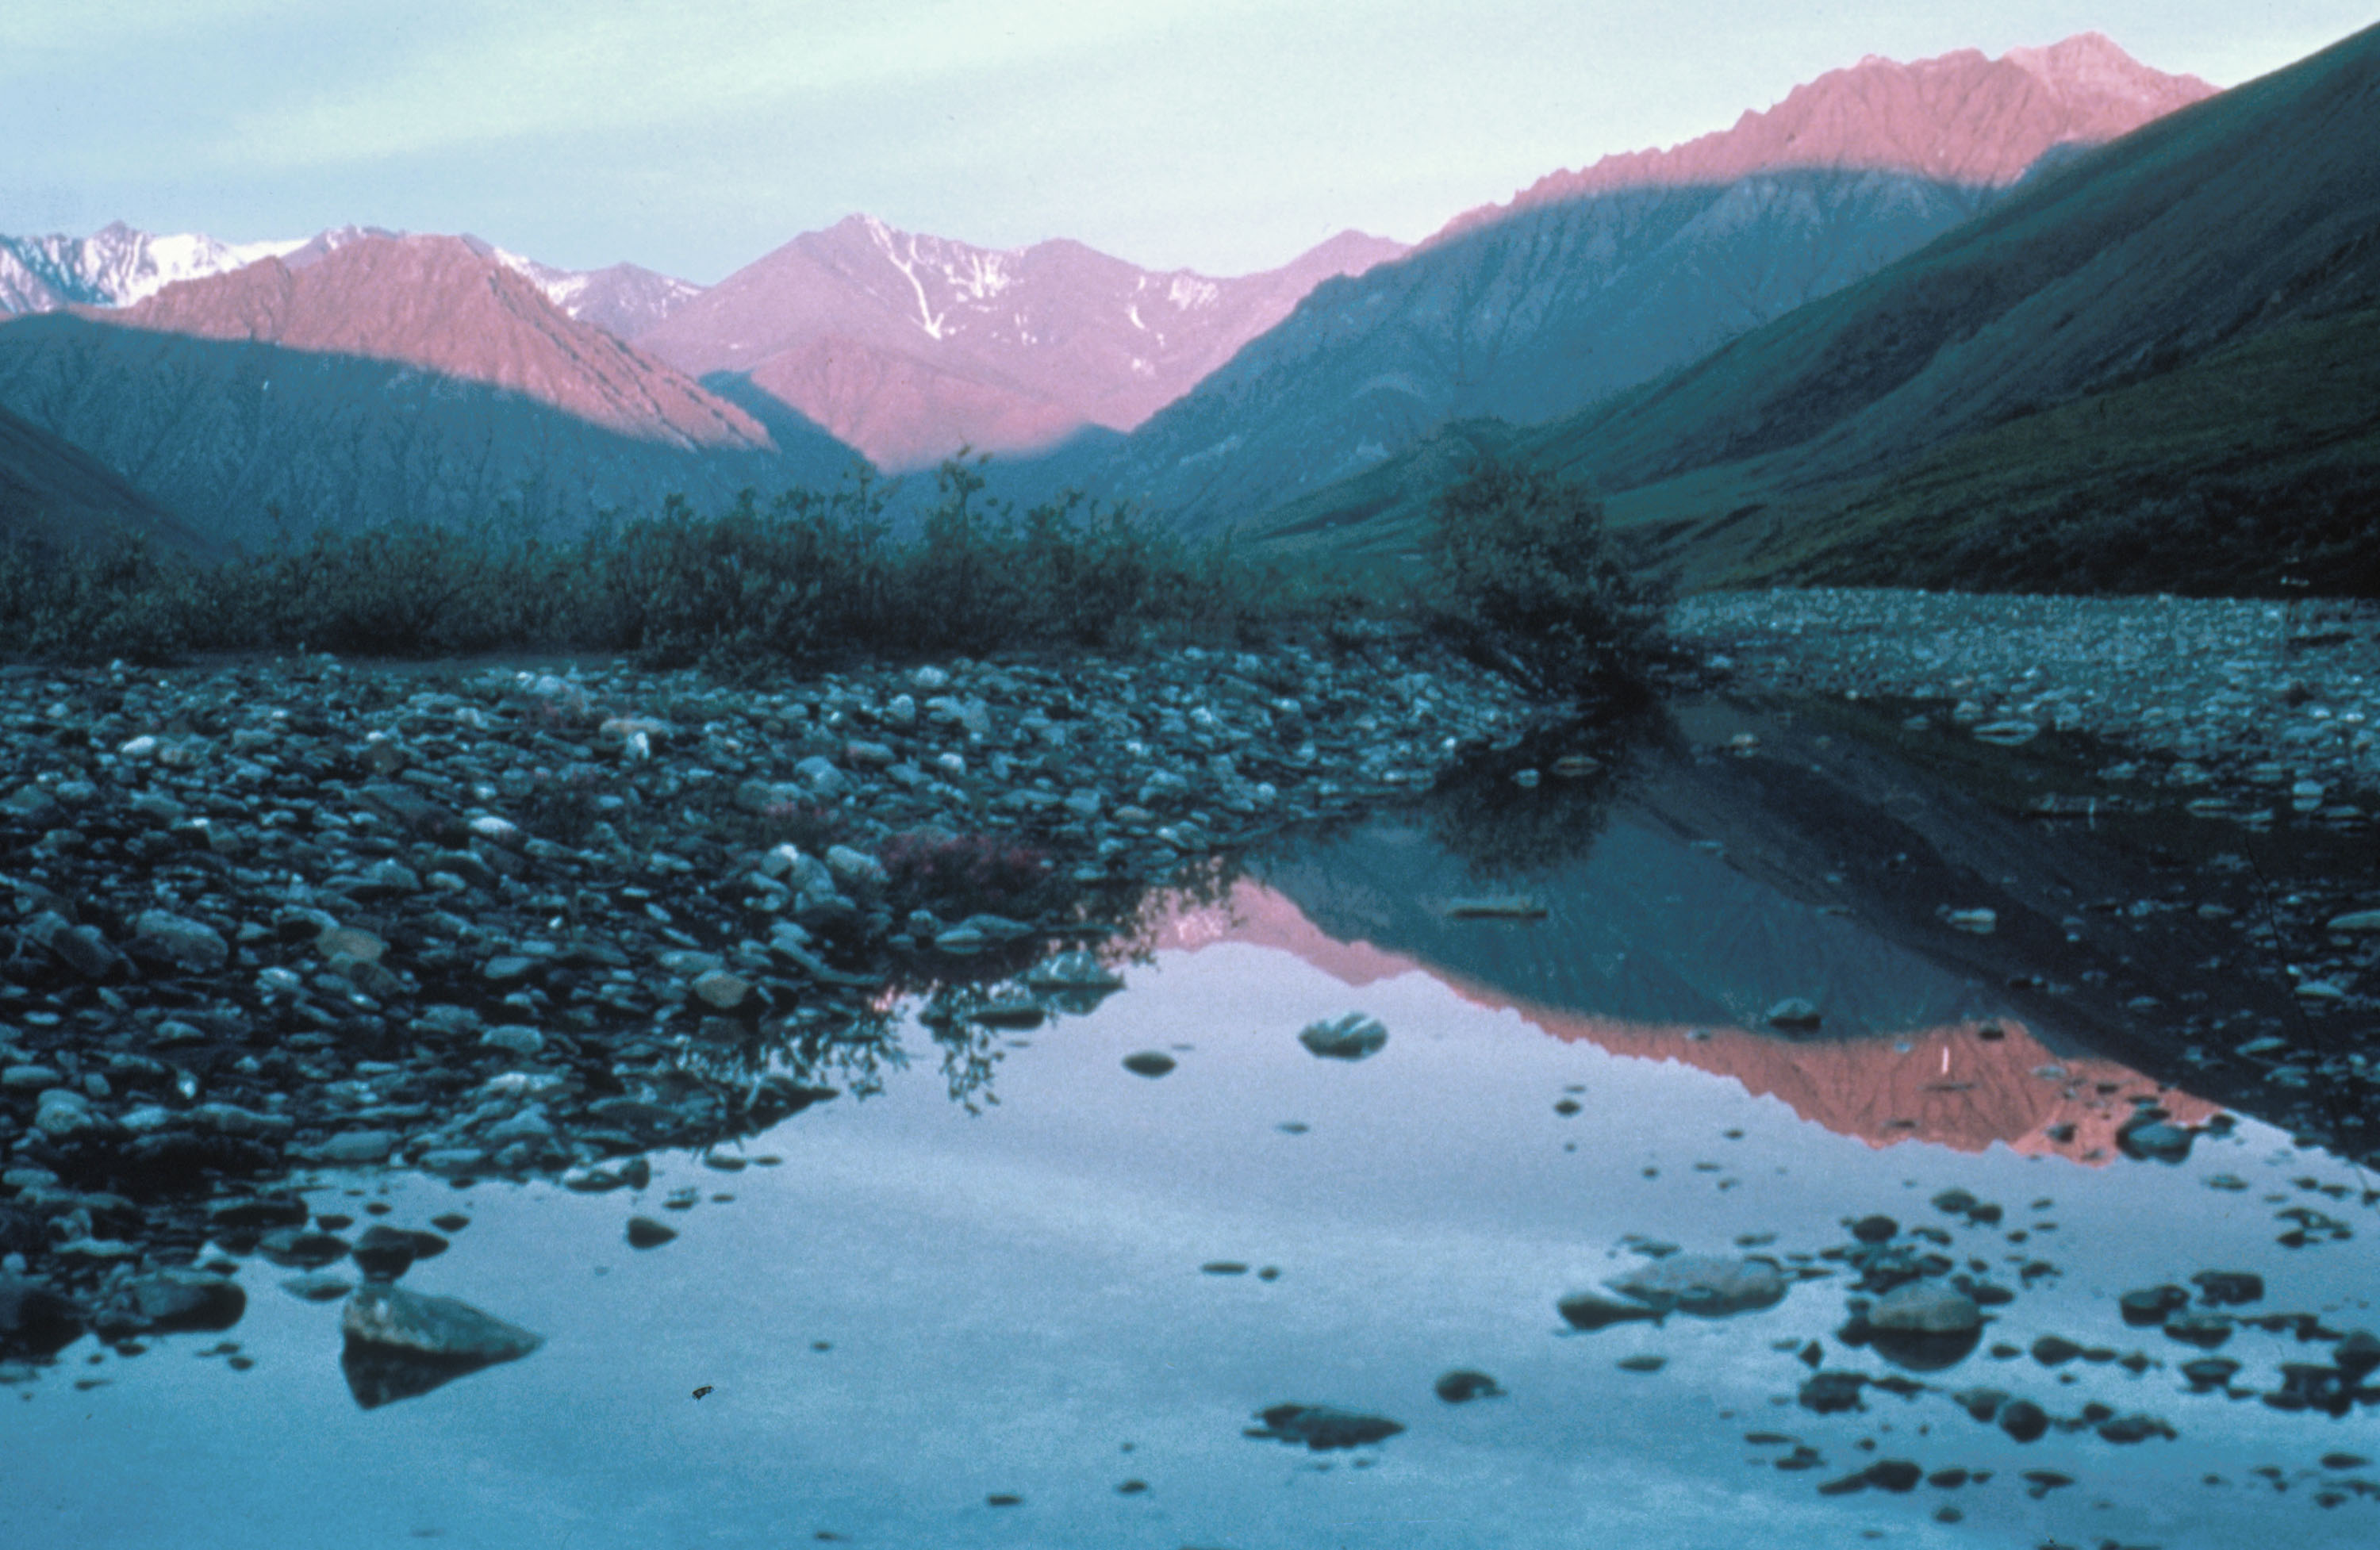 This undated photo shows the Kongakut Valley in the Arctic National Wildlife Refuge in Alaska (U.S. Fish and Wildlife Service/Getty Images)